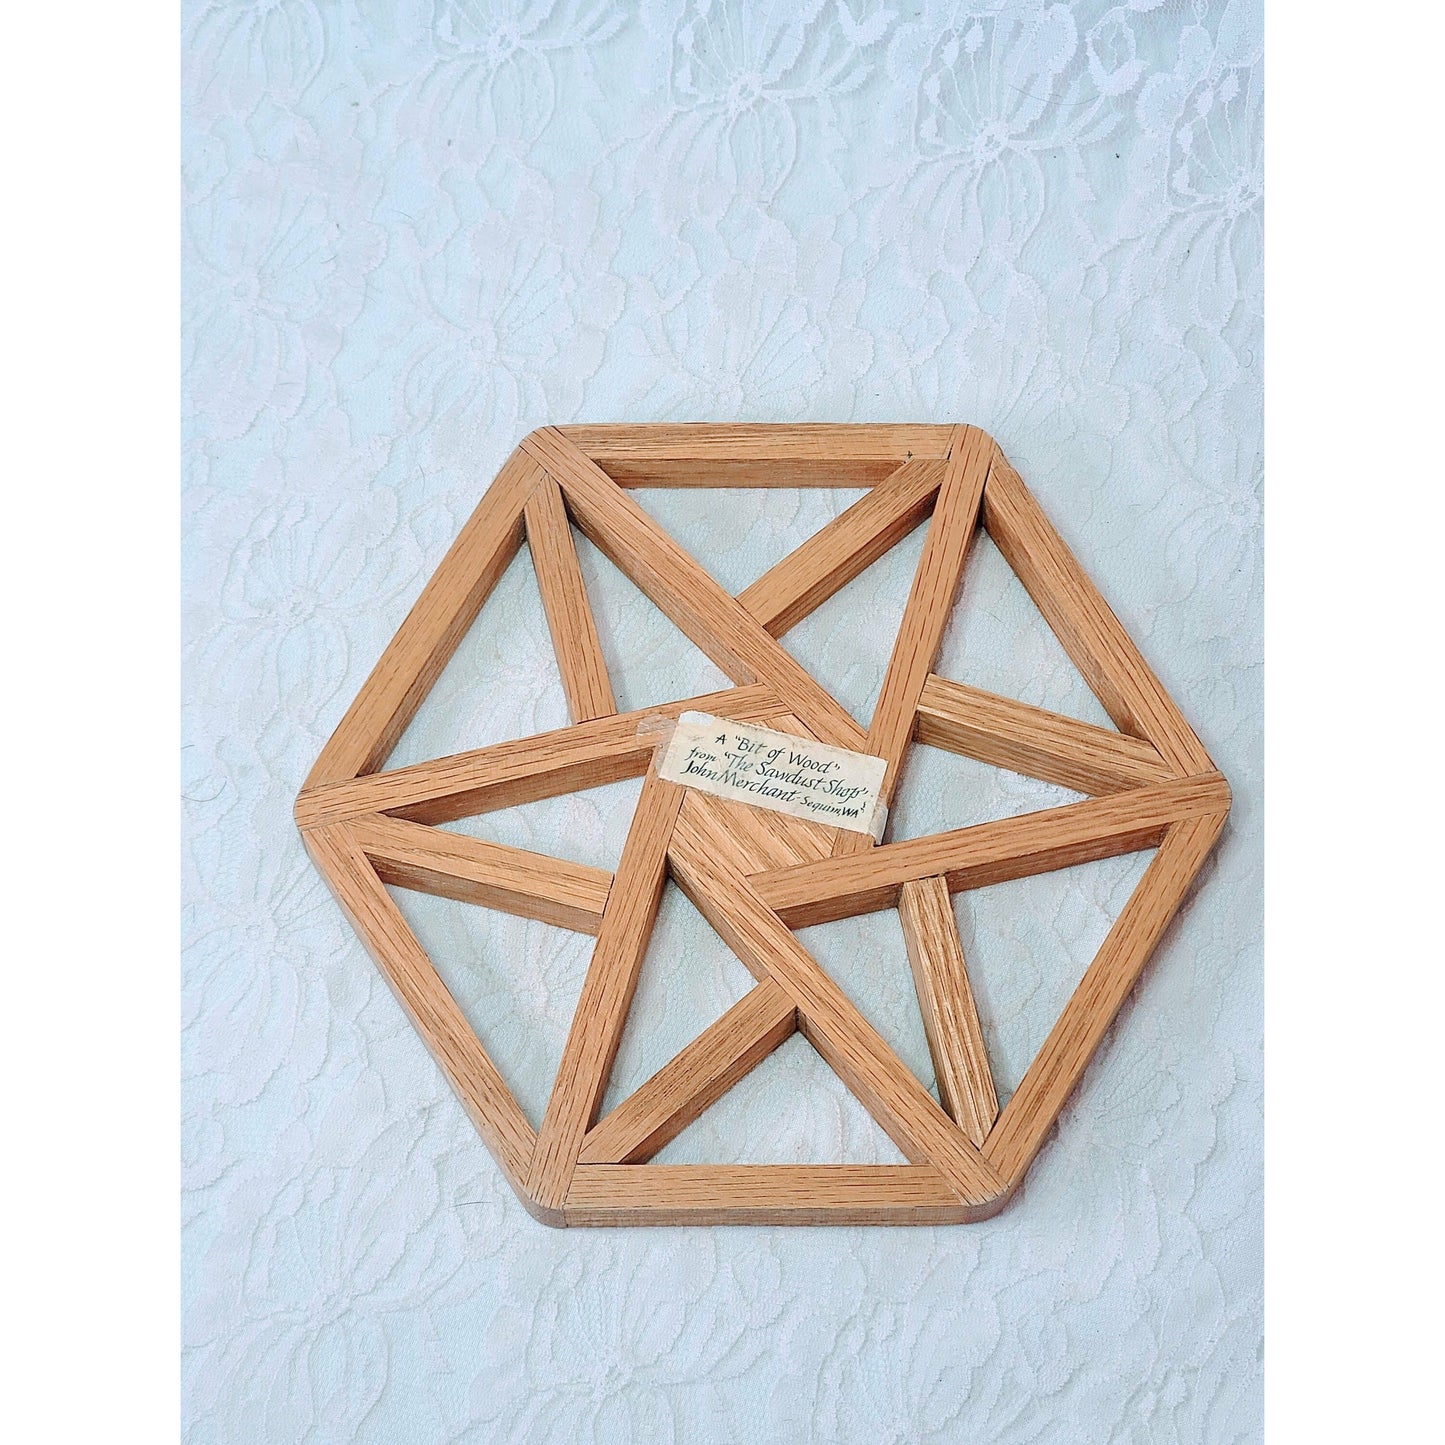 Wooden Trivet from "The Sawdust Shop" Sequim, Washington ~ Hot Pot Table Trivet or Large Coaster ~ Hand Made Wood 6 Sided Hexagon